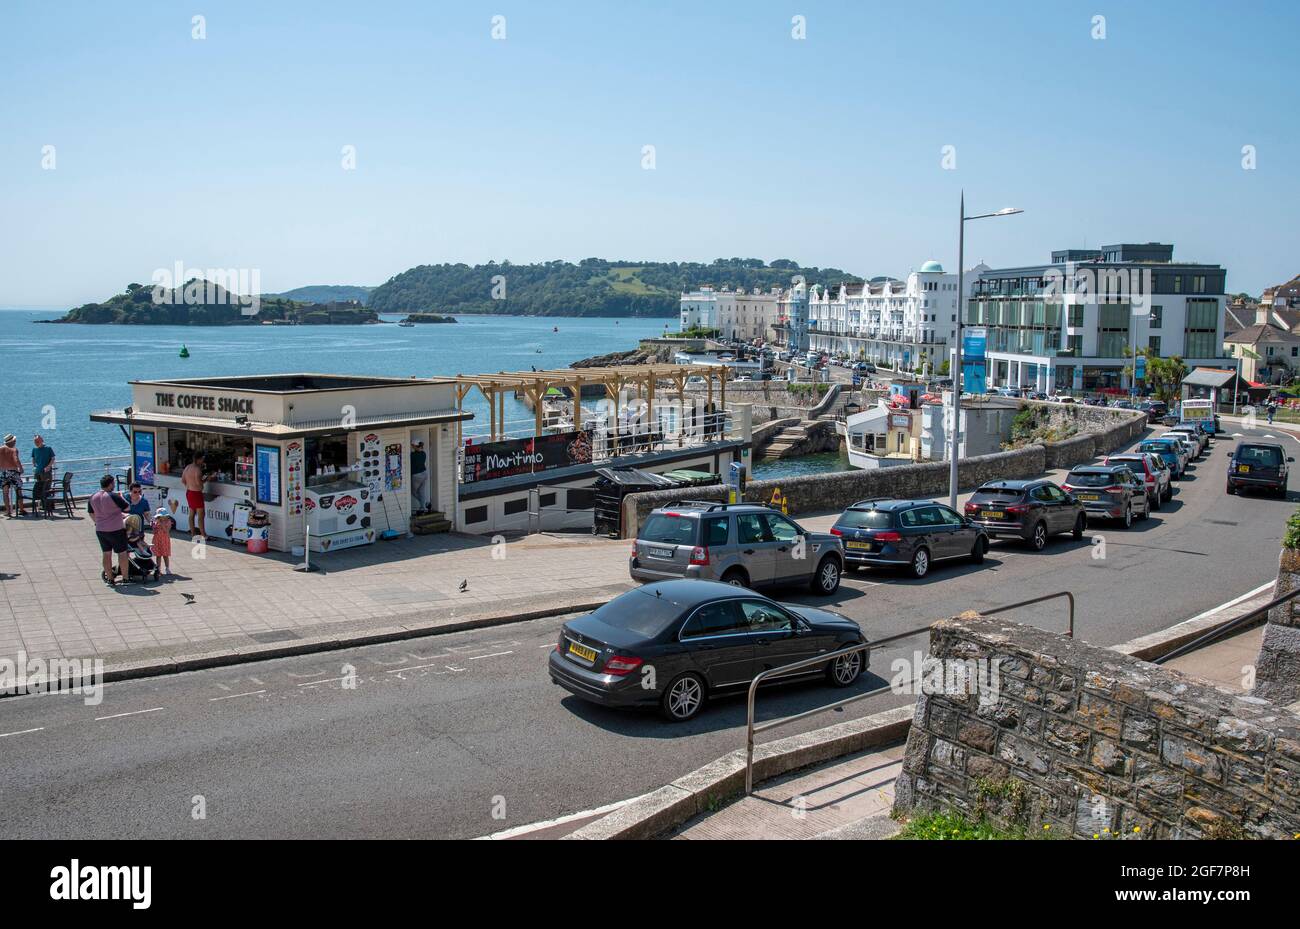 Plymouth, Devon, England, UK. 2021. The esplanade looking towards the West Hoe area and the Cornish coastline. Plymouth, UK. Stock Photo